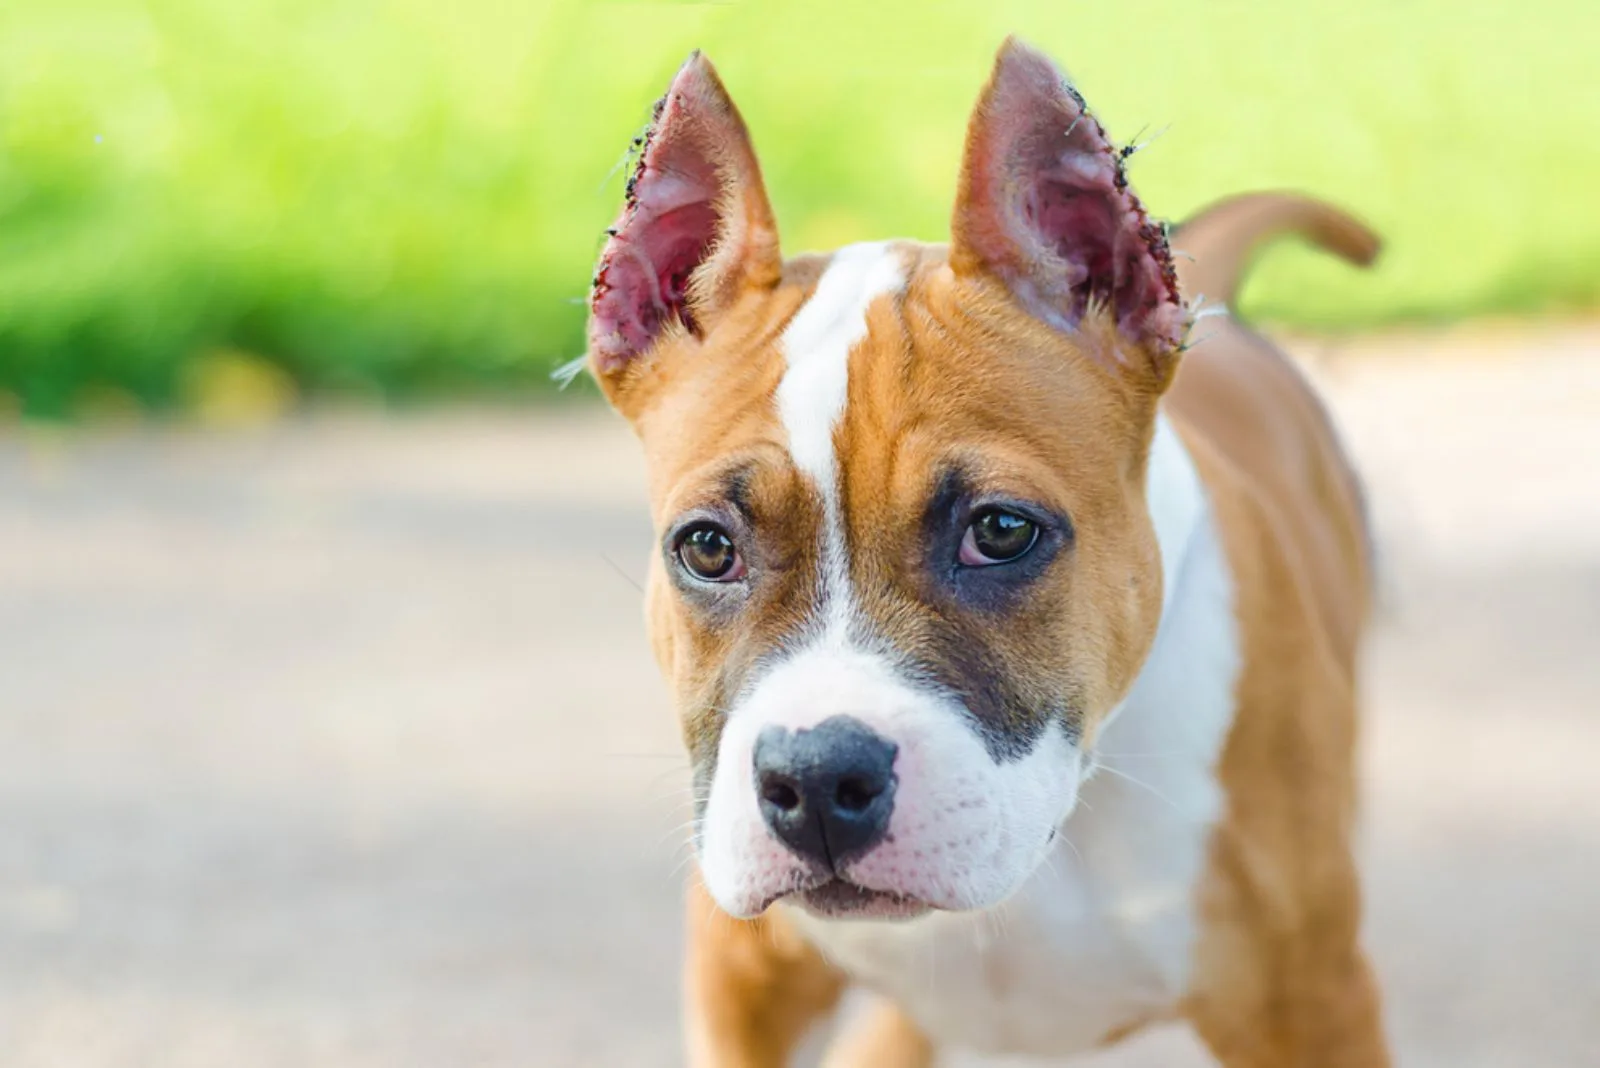  American Staffordshire Terrier with cropped ears